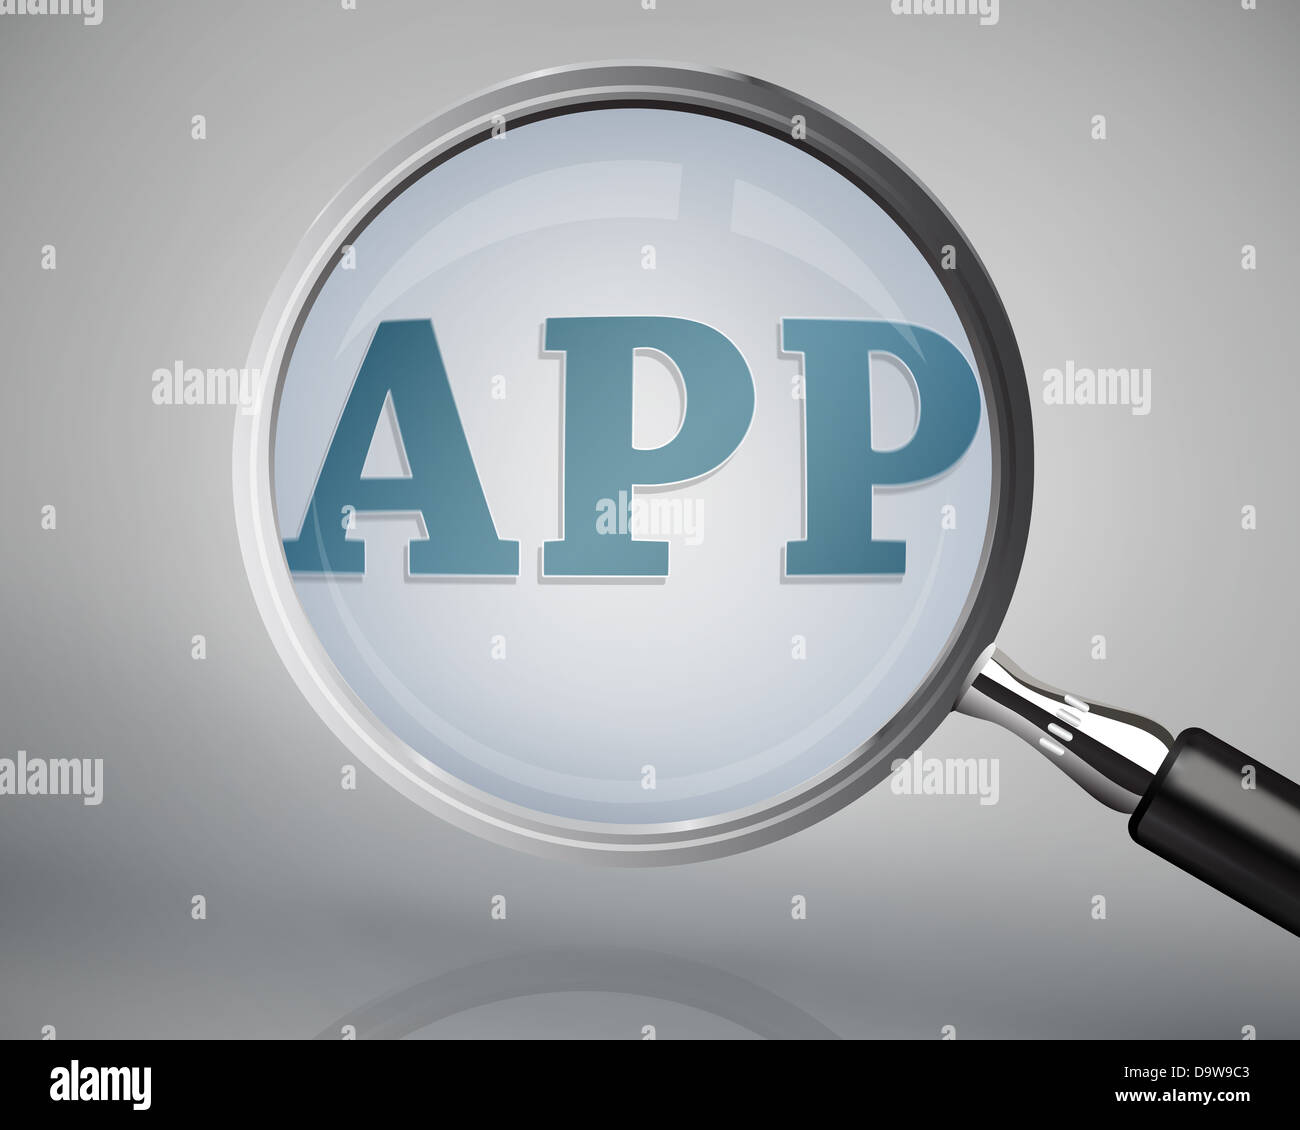 Magnifying glass showing app word Stock Photo